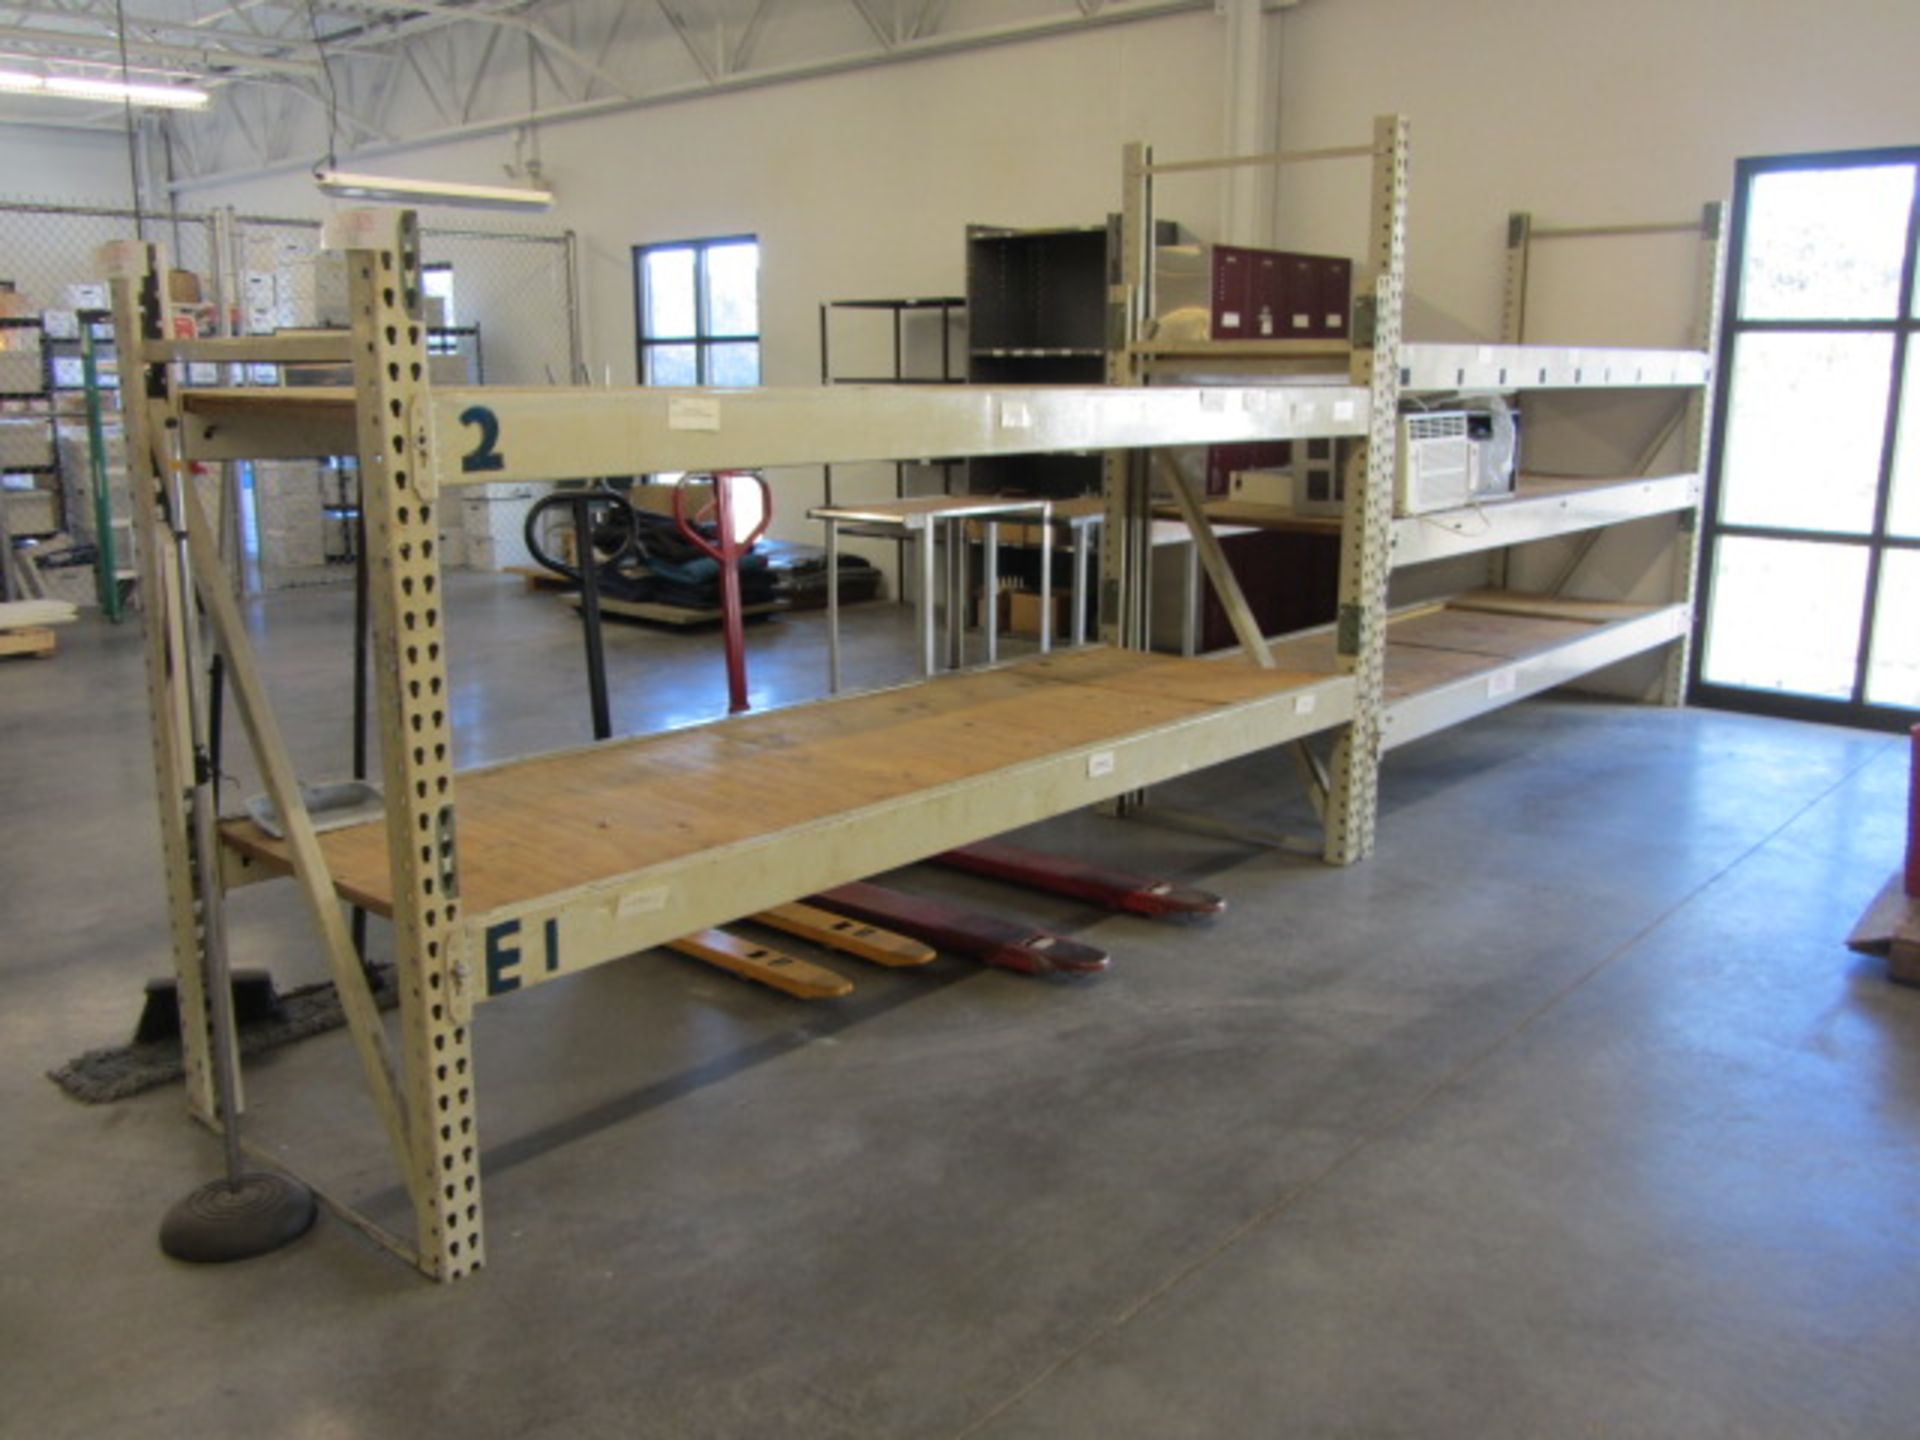 2 Sections of Pallet Racking